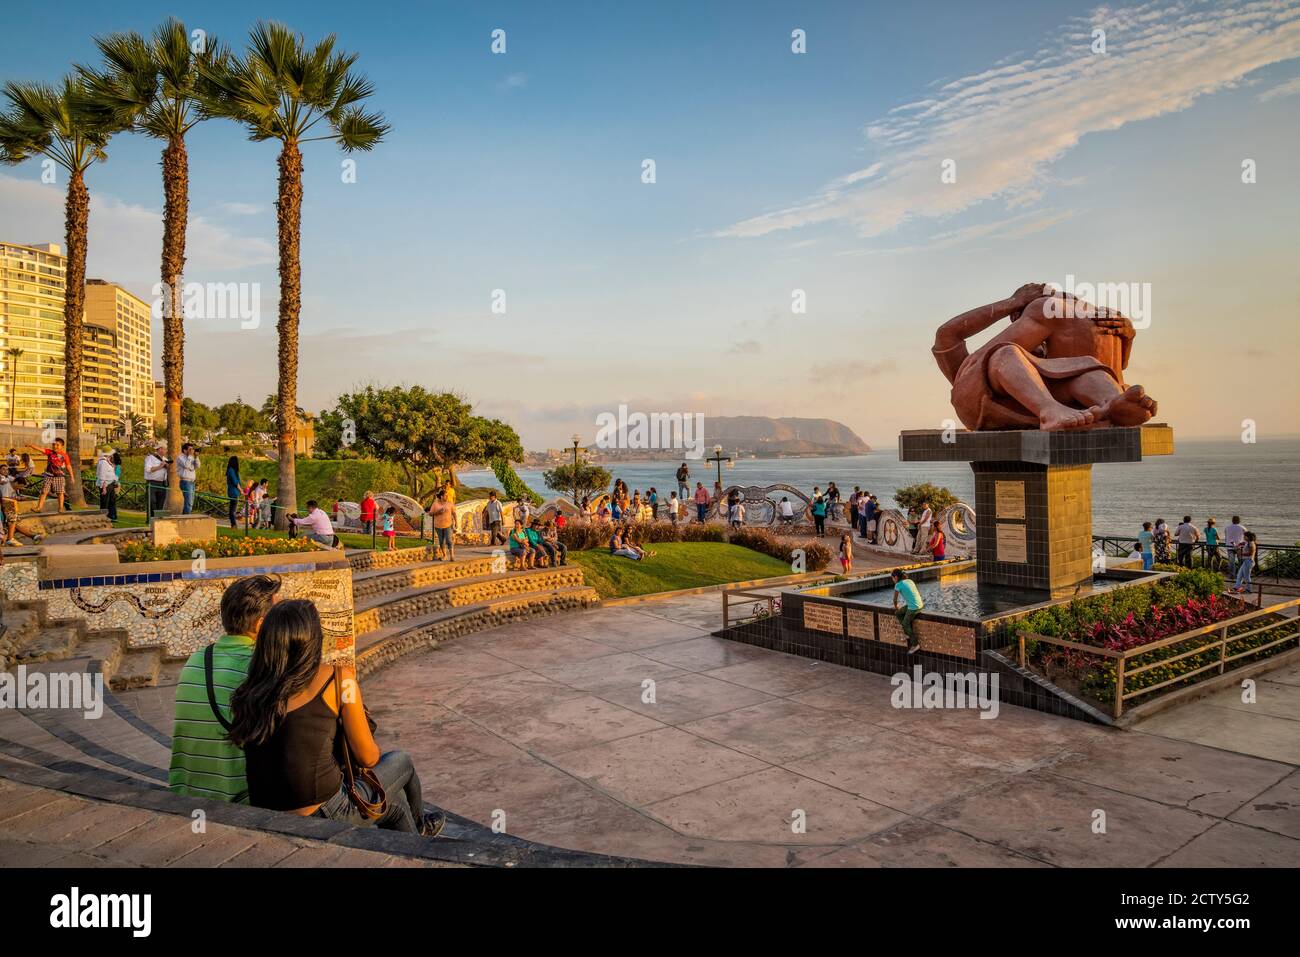 Parque del Amor (Love Park) on El Malecón in the Miraflores district of Lima, Peru, with sculpture of embracing couple 'Barque del Amor' by Víctor Del Stock Photo